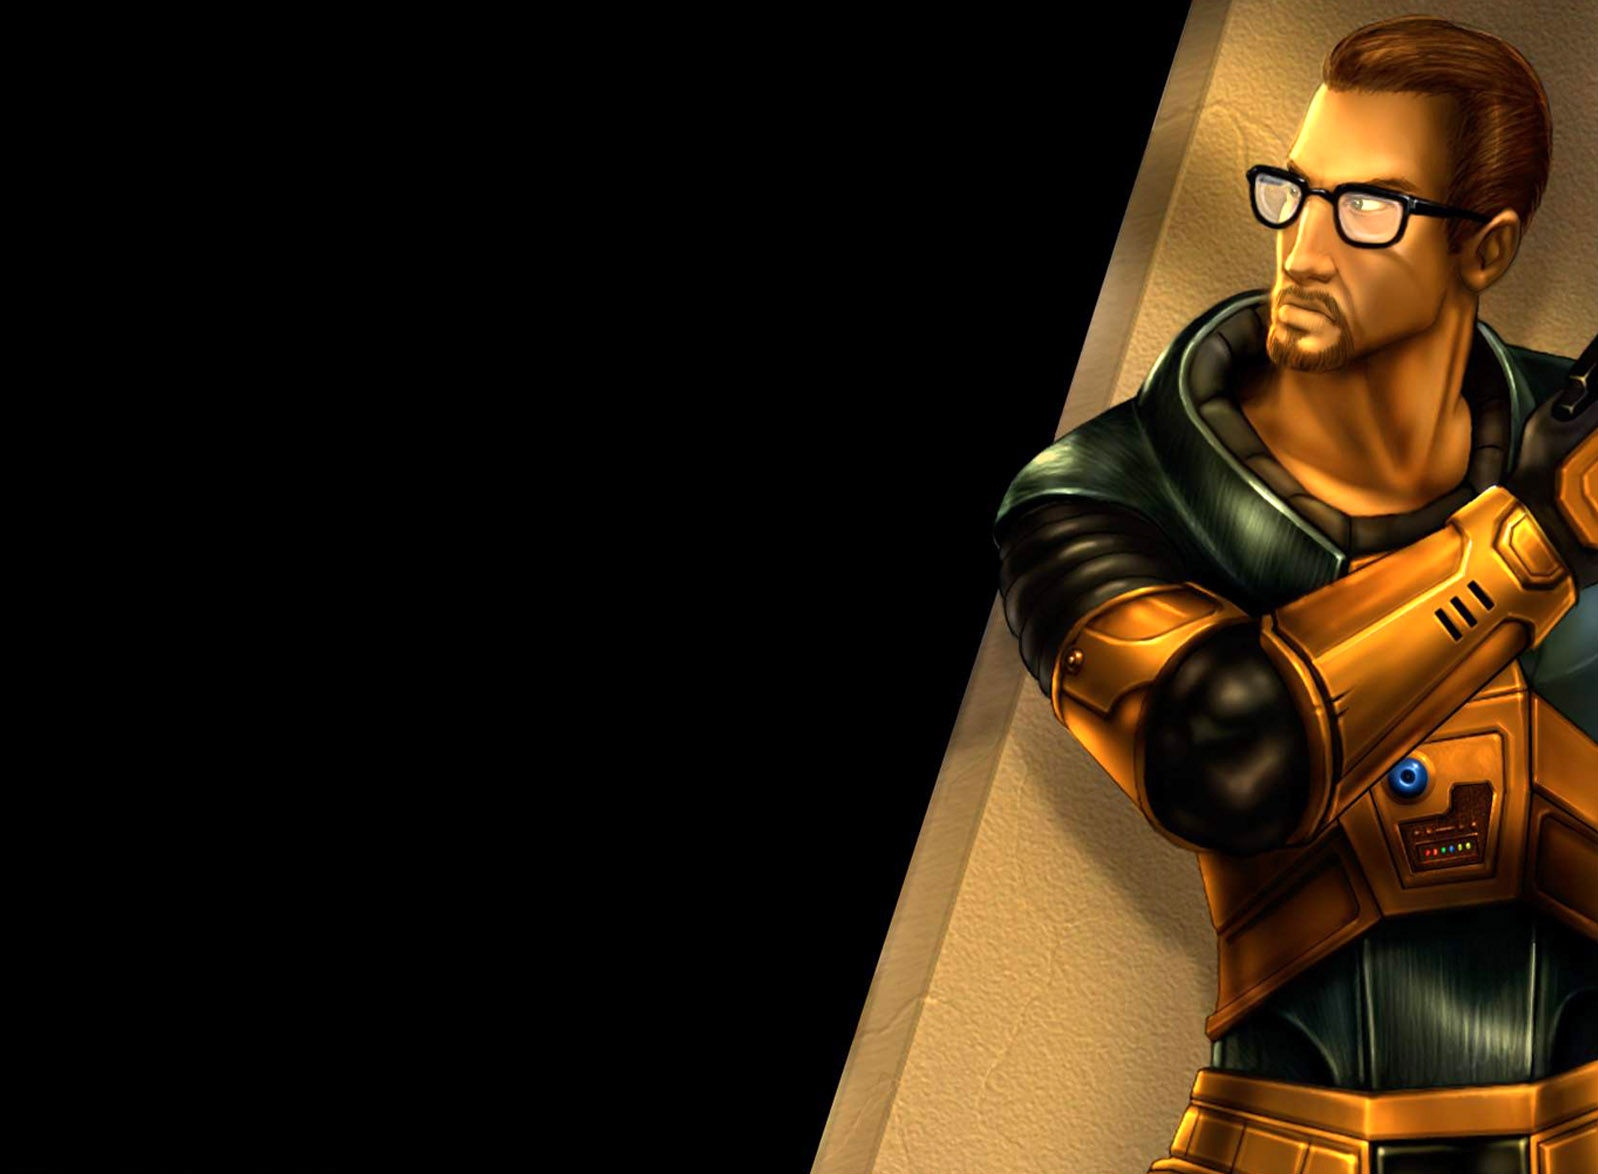 Gordon Freeman, the iconic protagonist from the game.